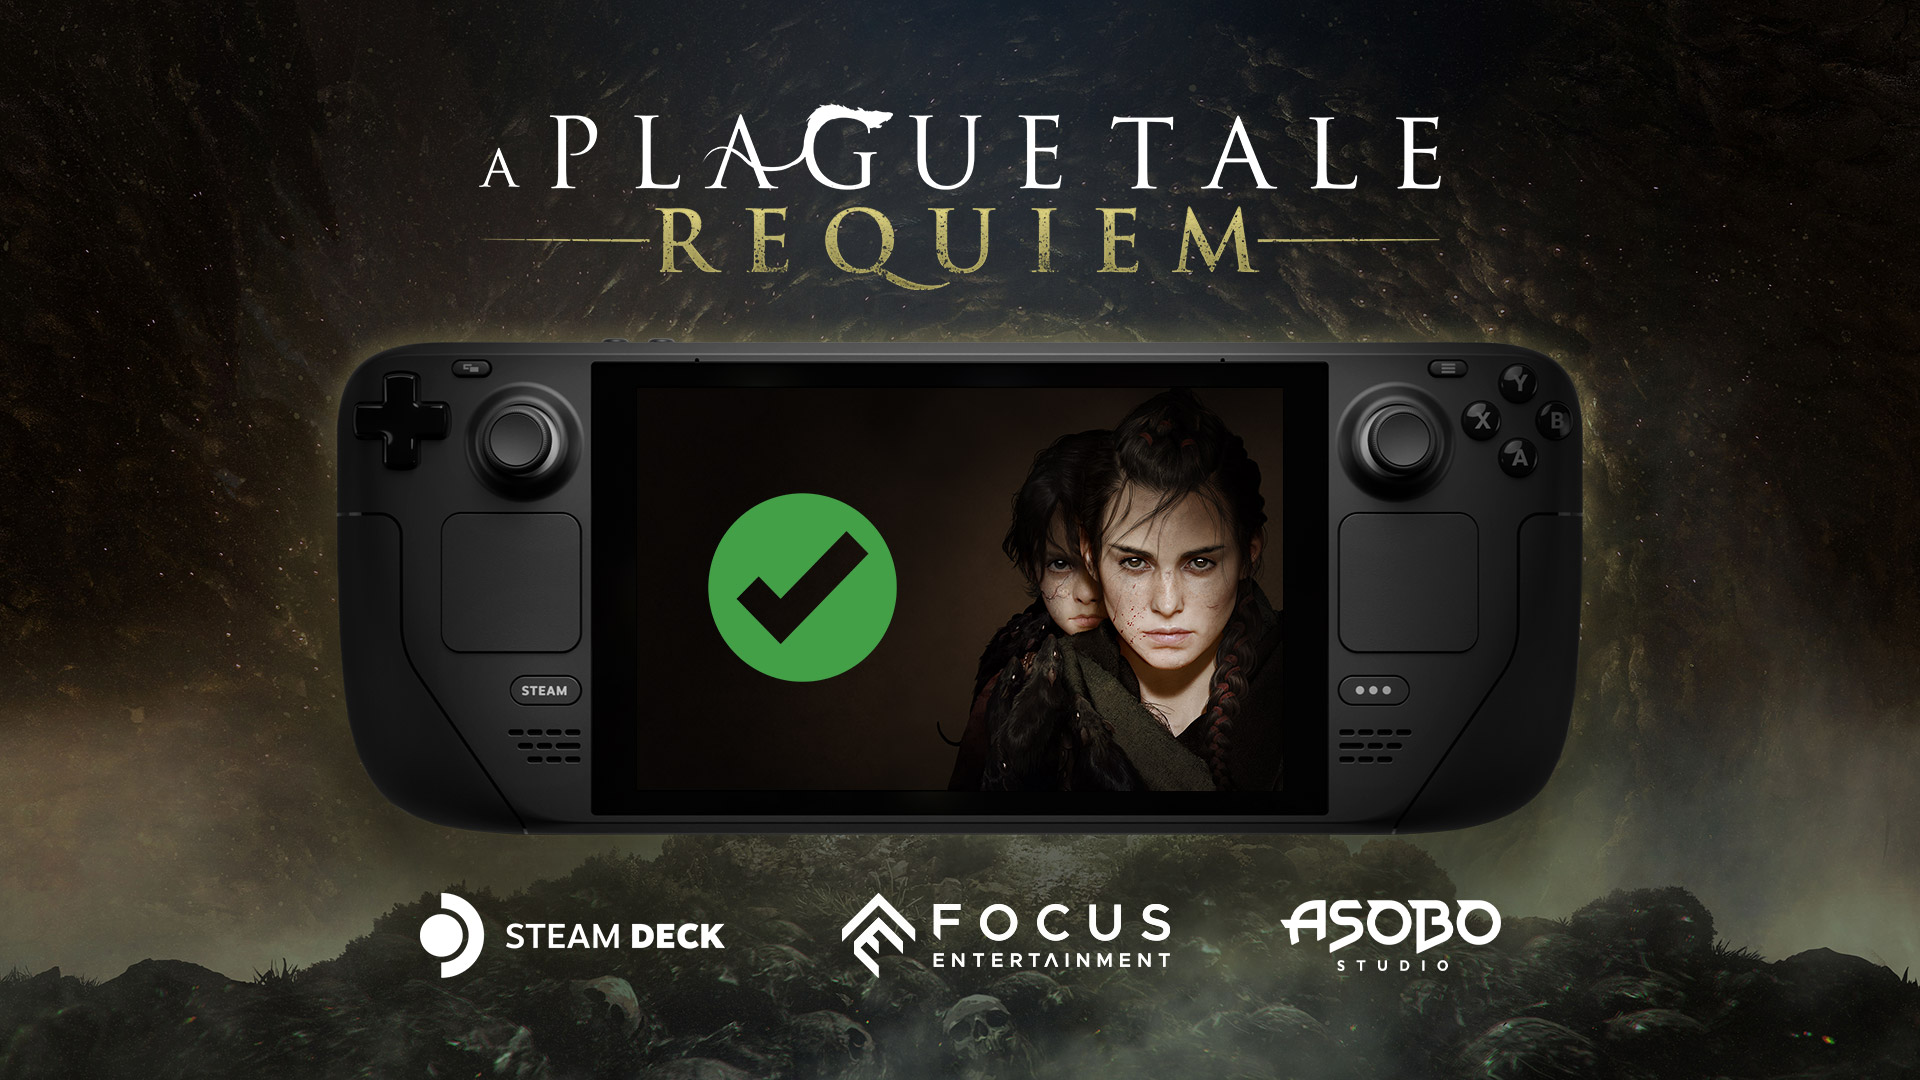 A Plague Tale Requiem PC System Requirements, Release Date, Content, and  More!